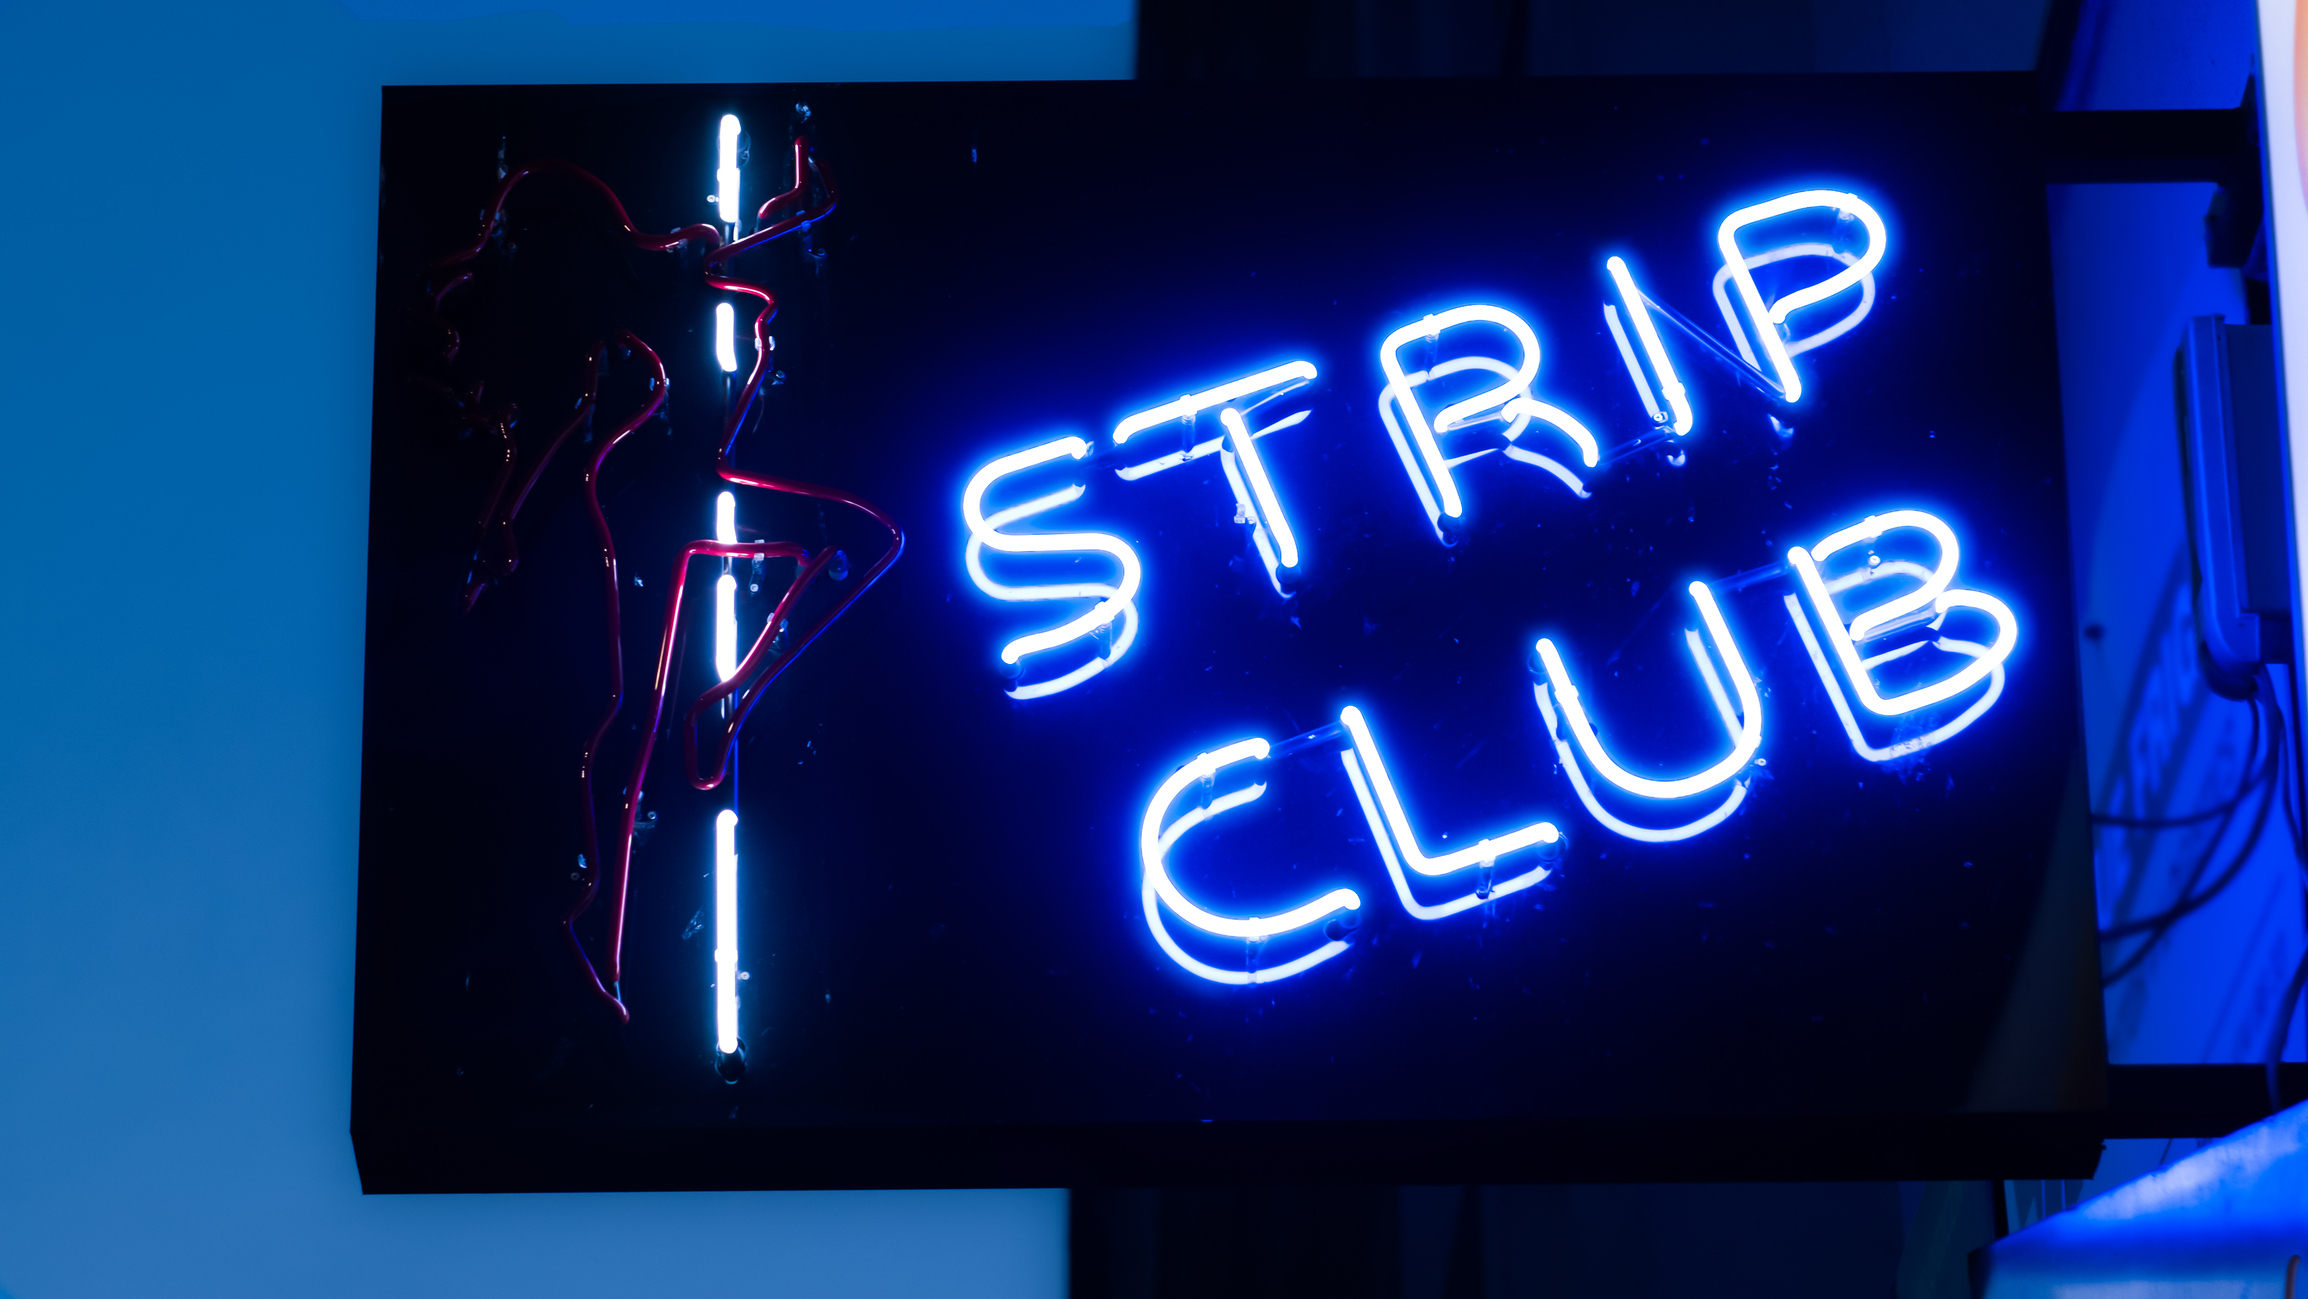 Neon &quot;Strip Club&quot; sign with a silhouette of a woman on a pole